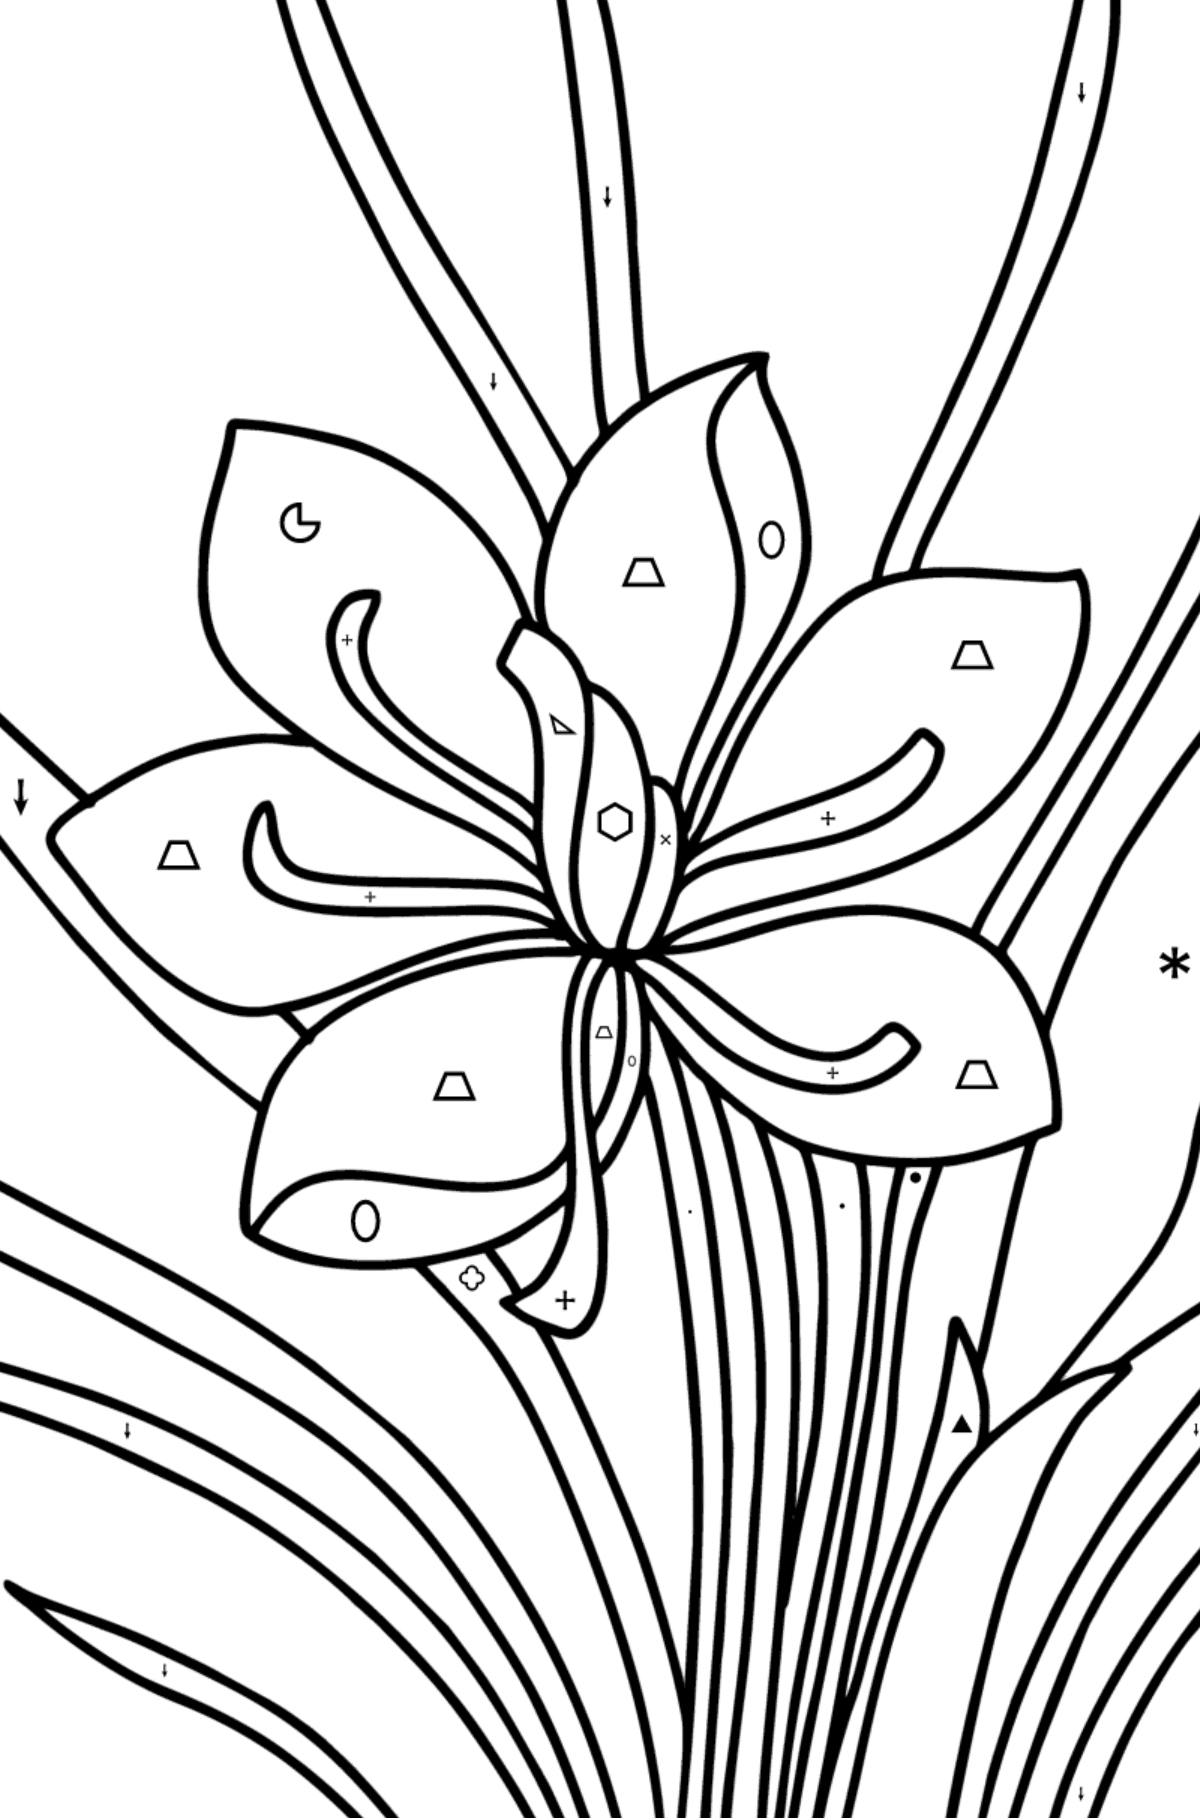 Crocus coloring page - Coloring by Symbols and Geometric Shapes for Kids